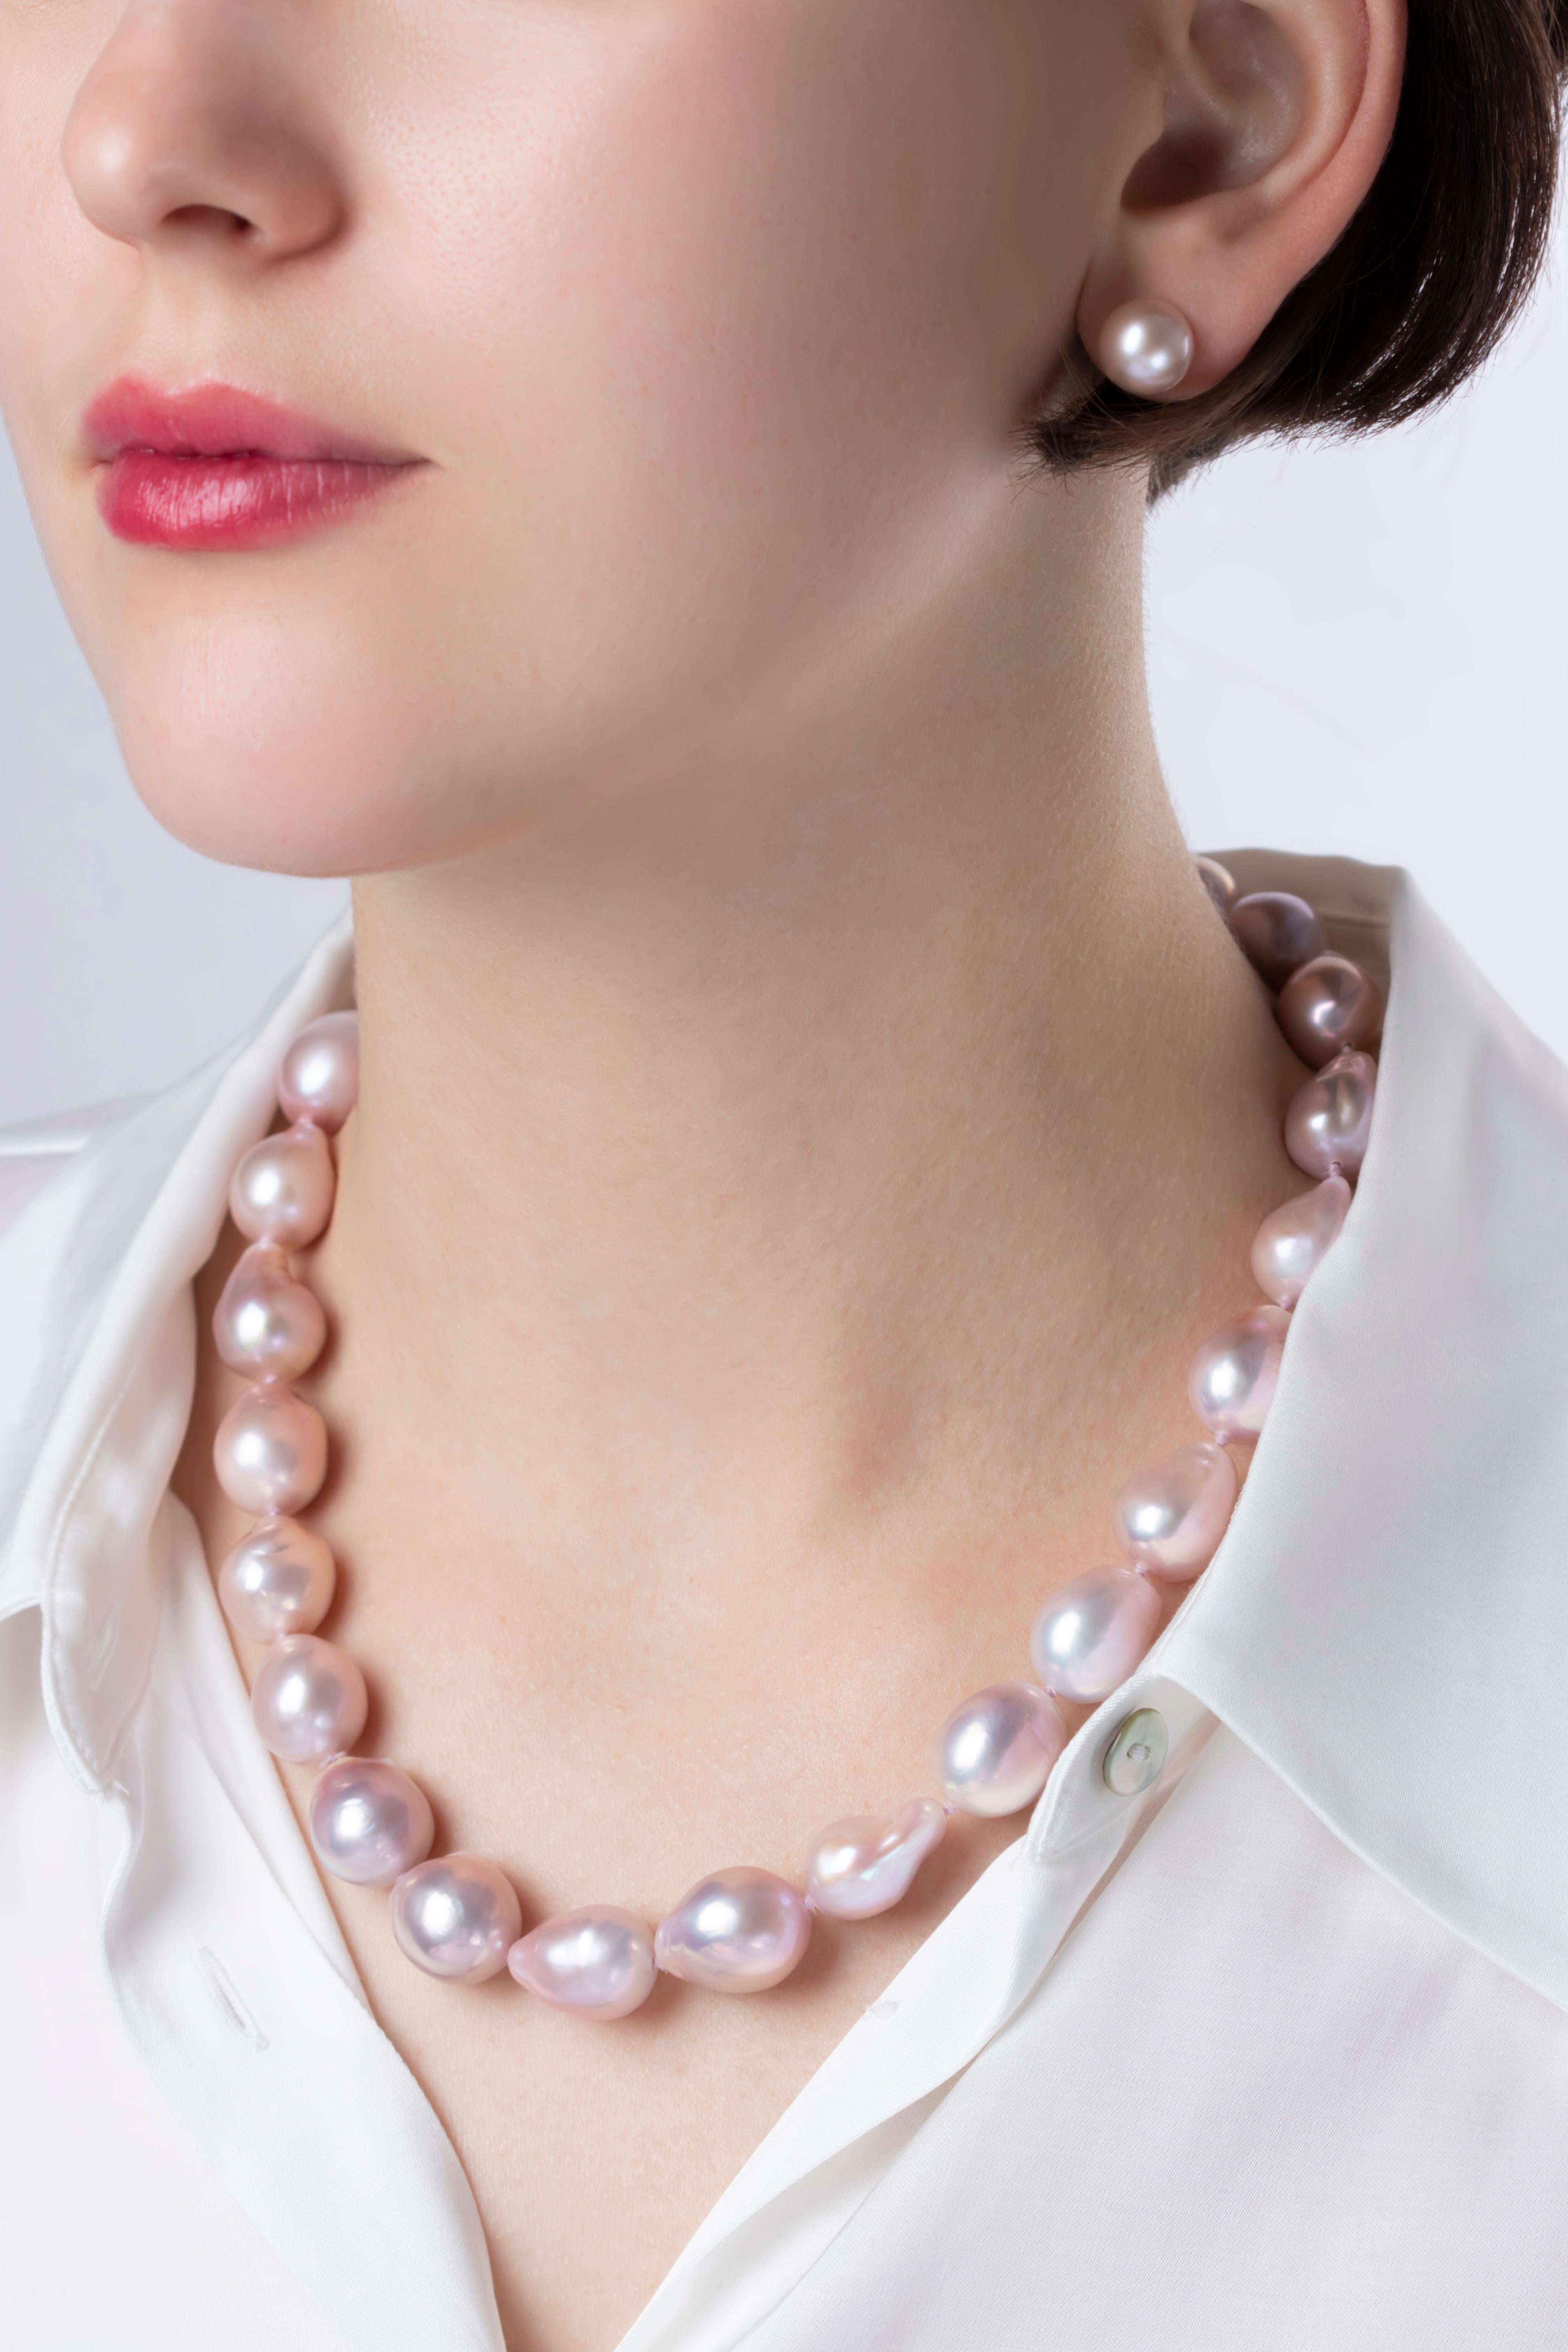 Comprised of timeless, jewellery box staples, our Classic collection is designed to last through the generations. Featuring large rare, natural colour Baroque shaped pink Freshwater pearls secured to an 18K white gold clasp, this necklace is an